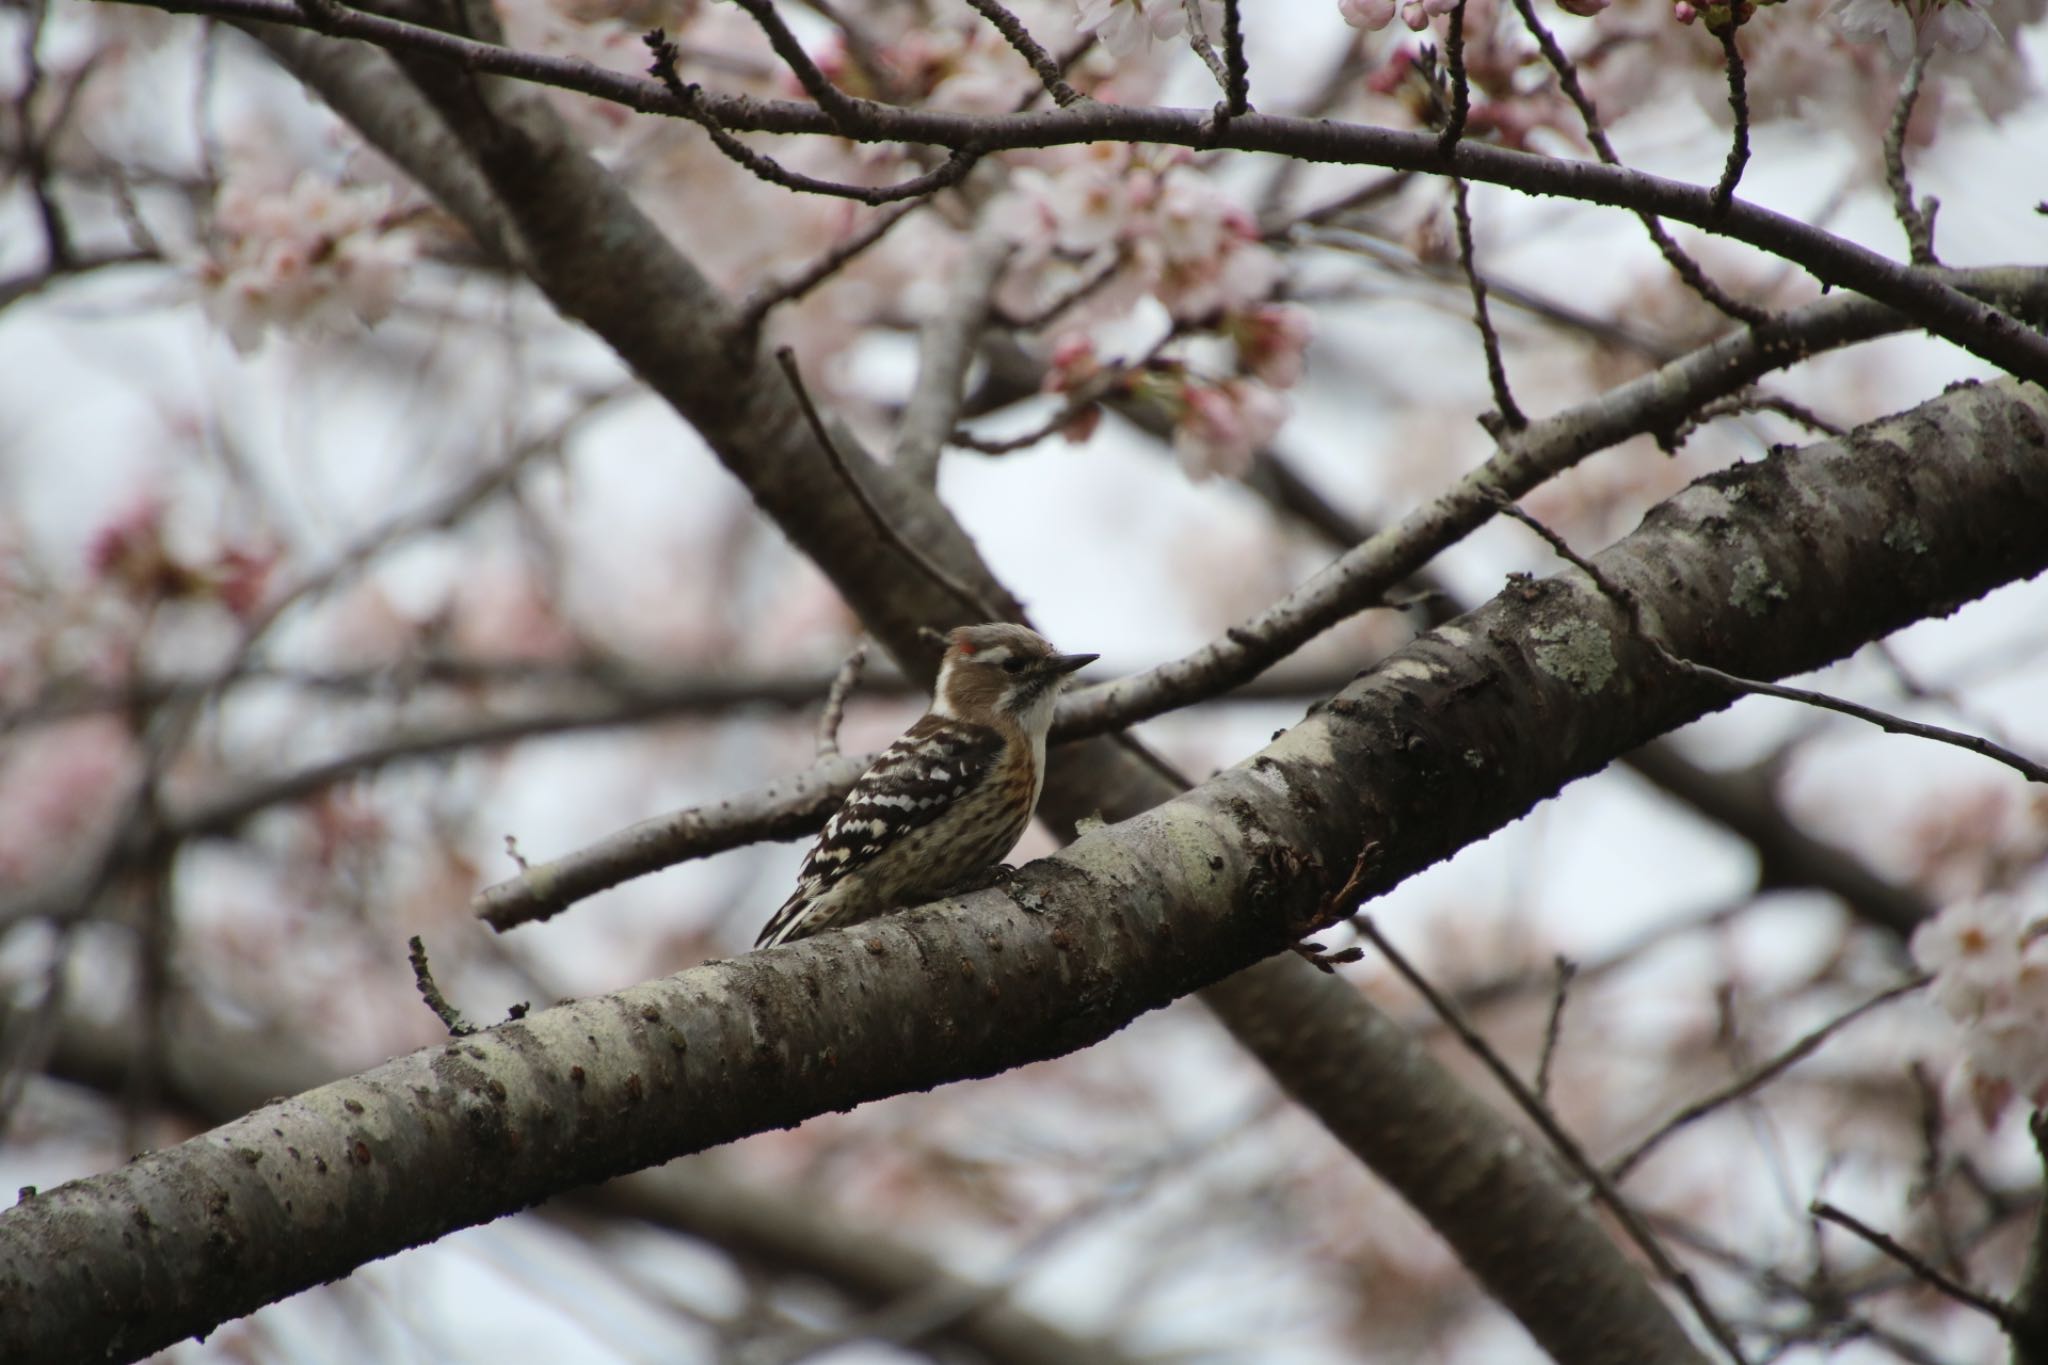 Photo of Japanese Pygmy Woodpecker at 希望ヶ丘文化公園 by Mariko N